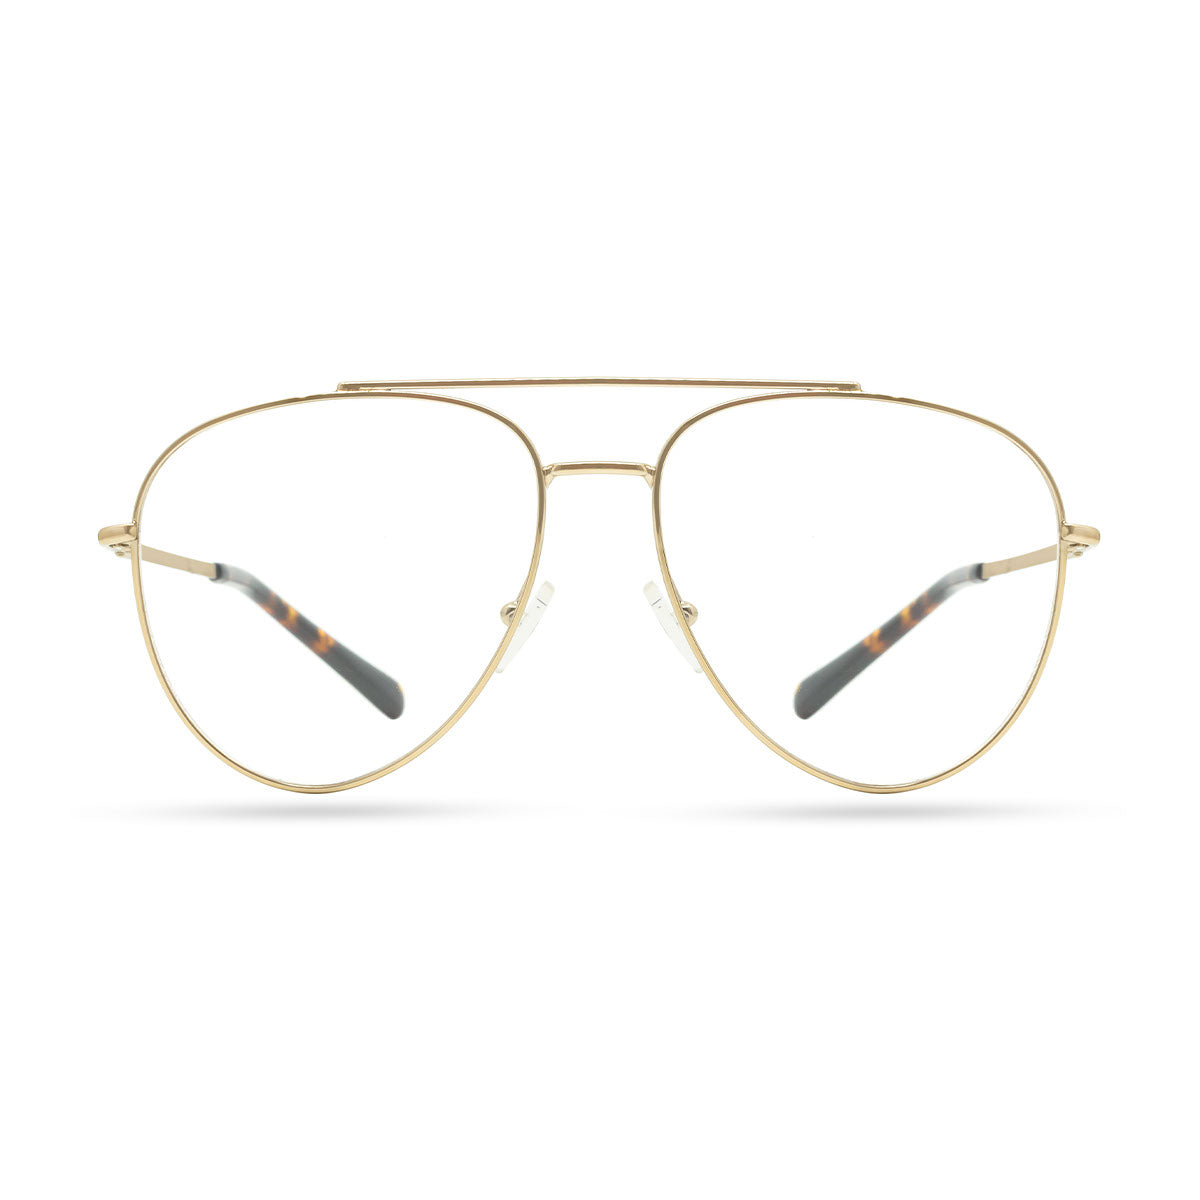 ARMANI EXCHANGE AX 1055 6110 spectacle-frame